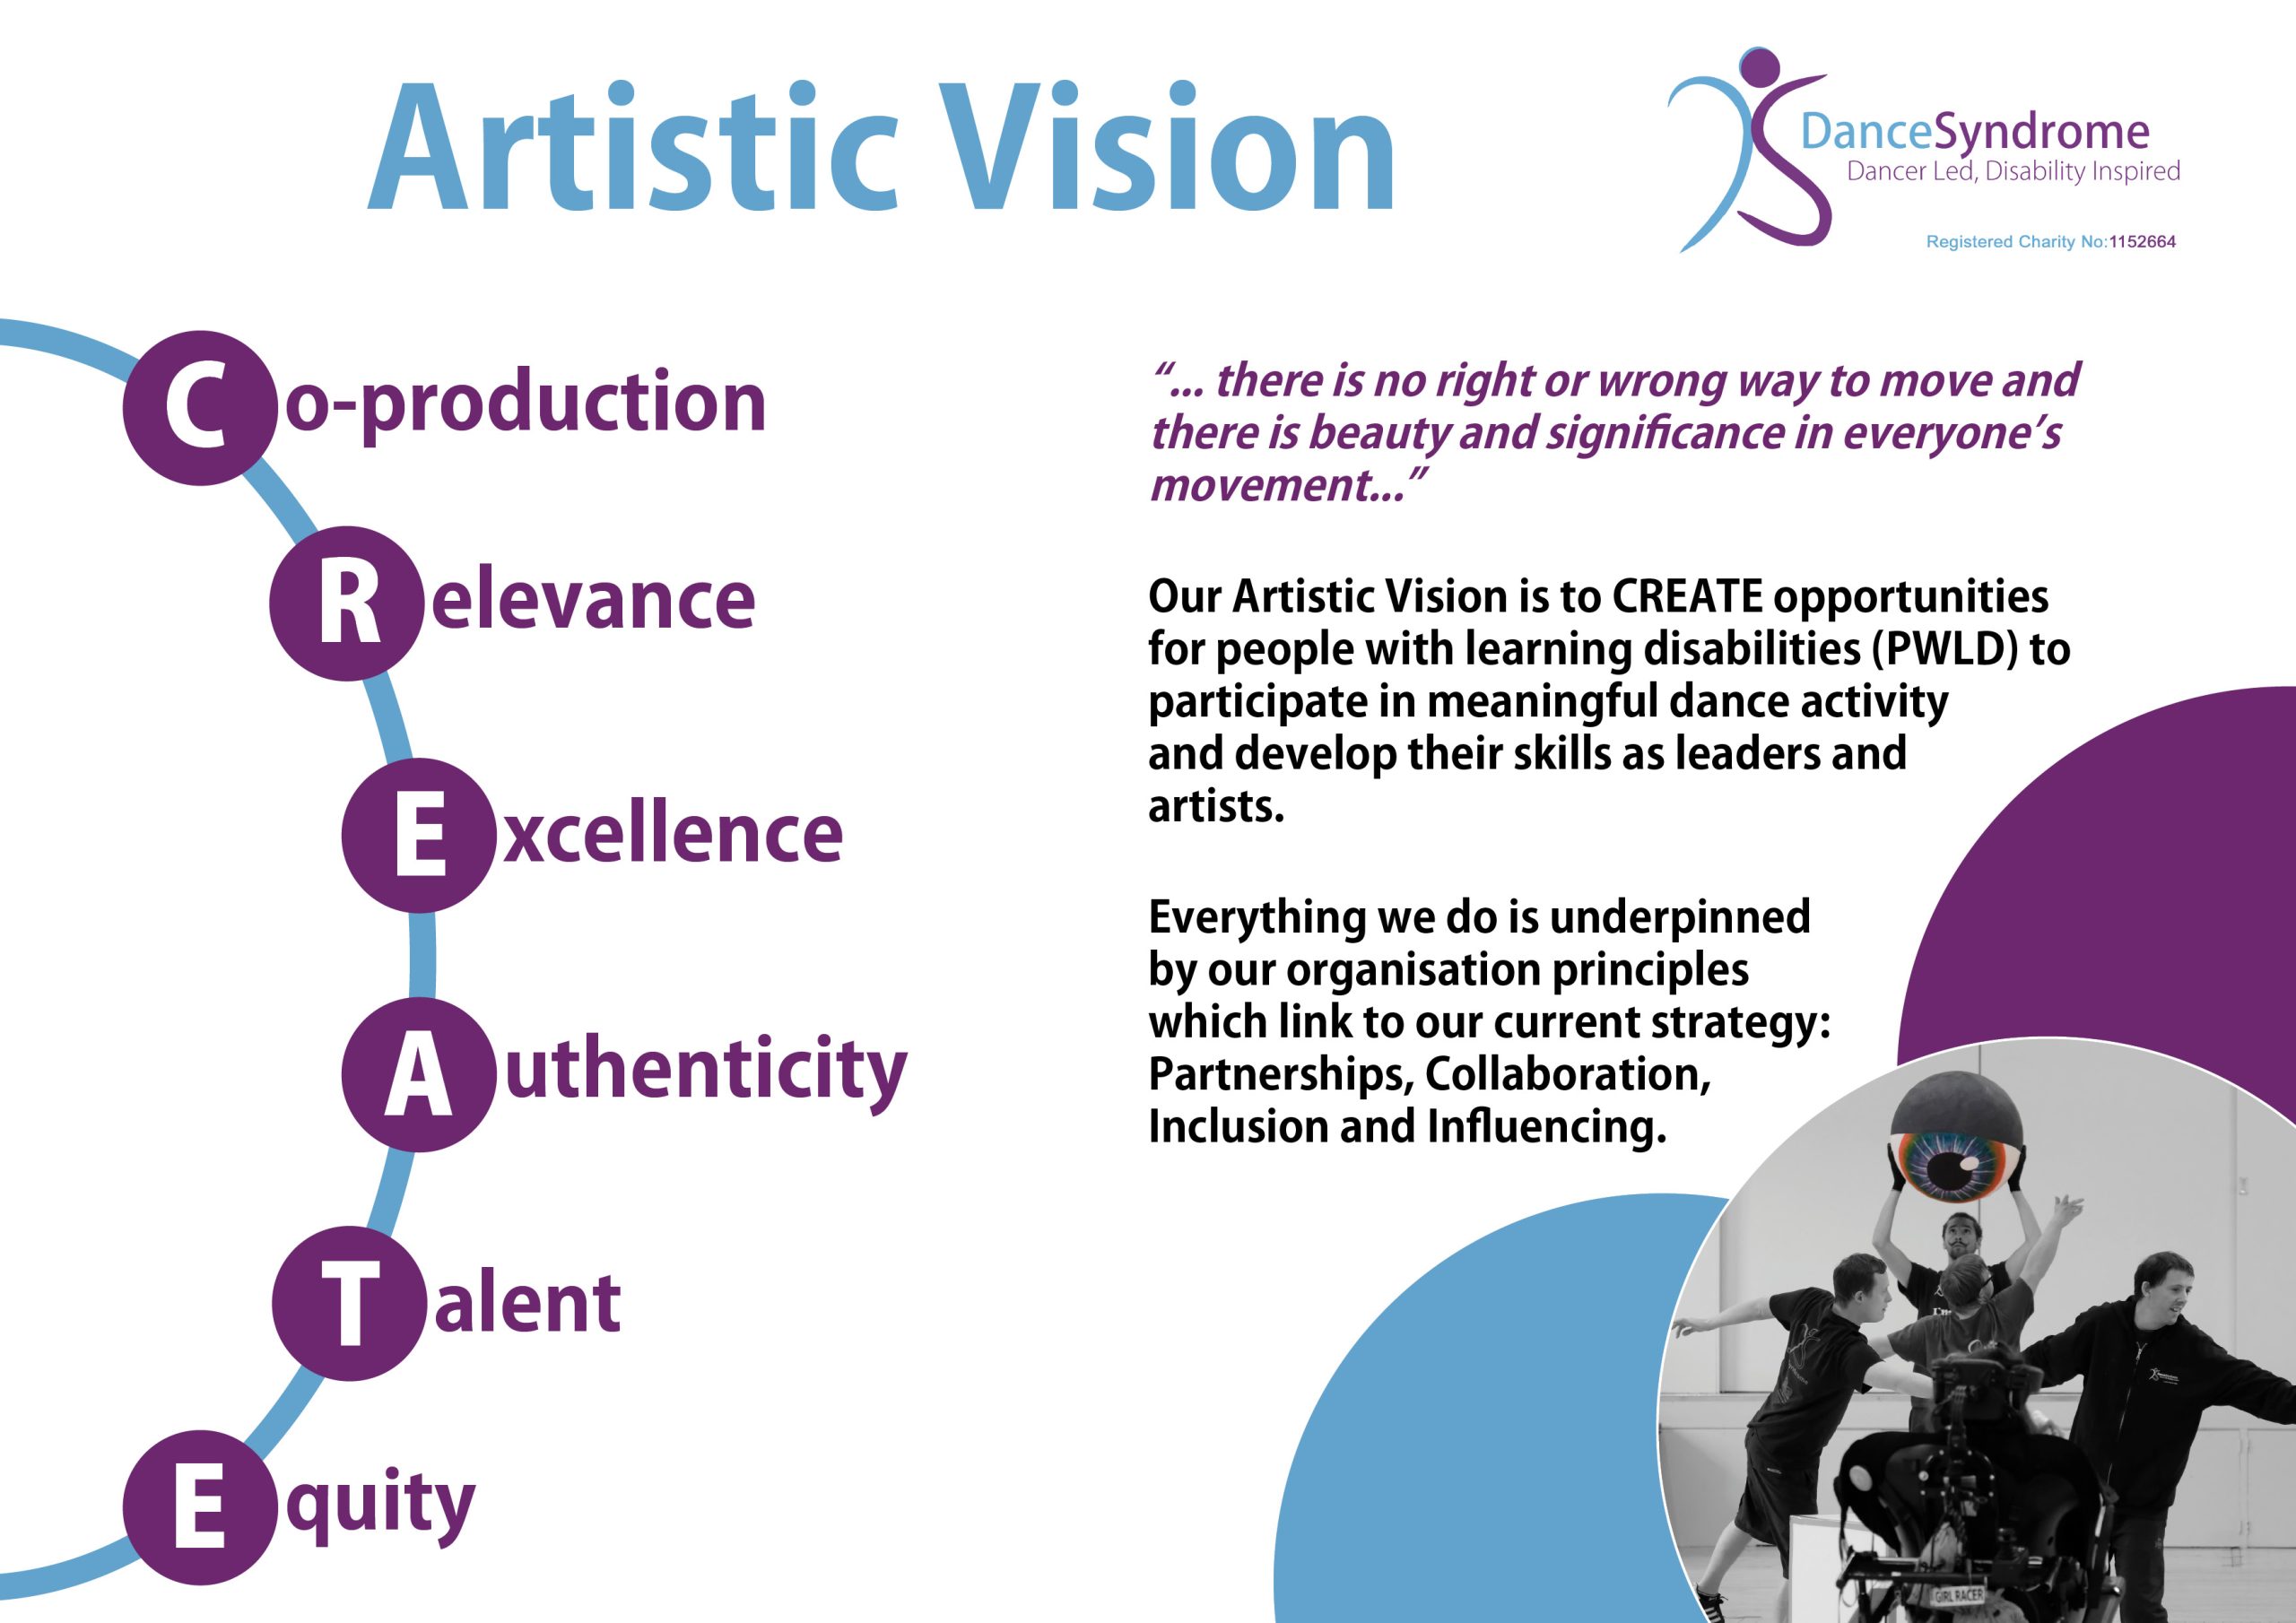 A visual of our Artistic Vision "CREATE" which links to an accessible PDF of the full Artistic Vision explanation